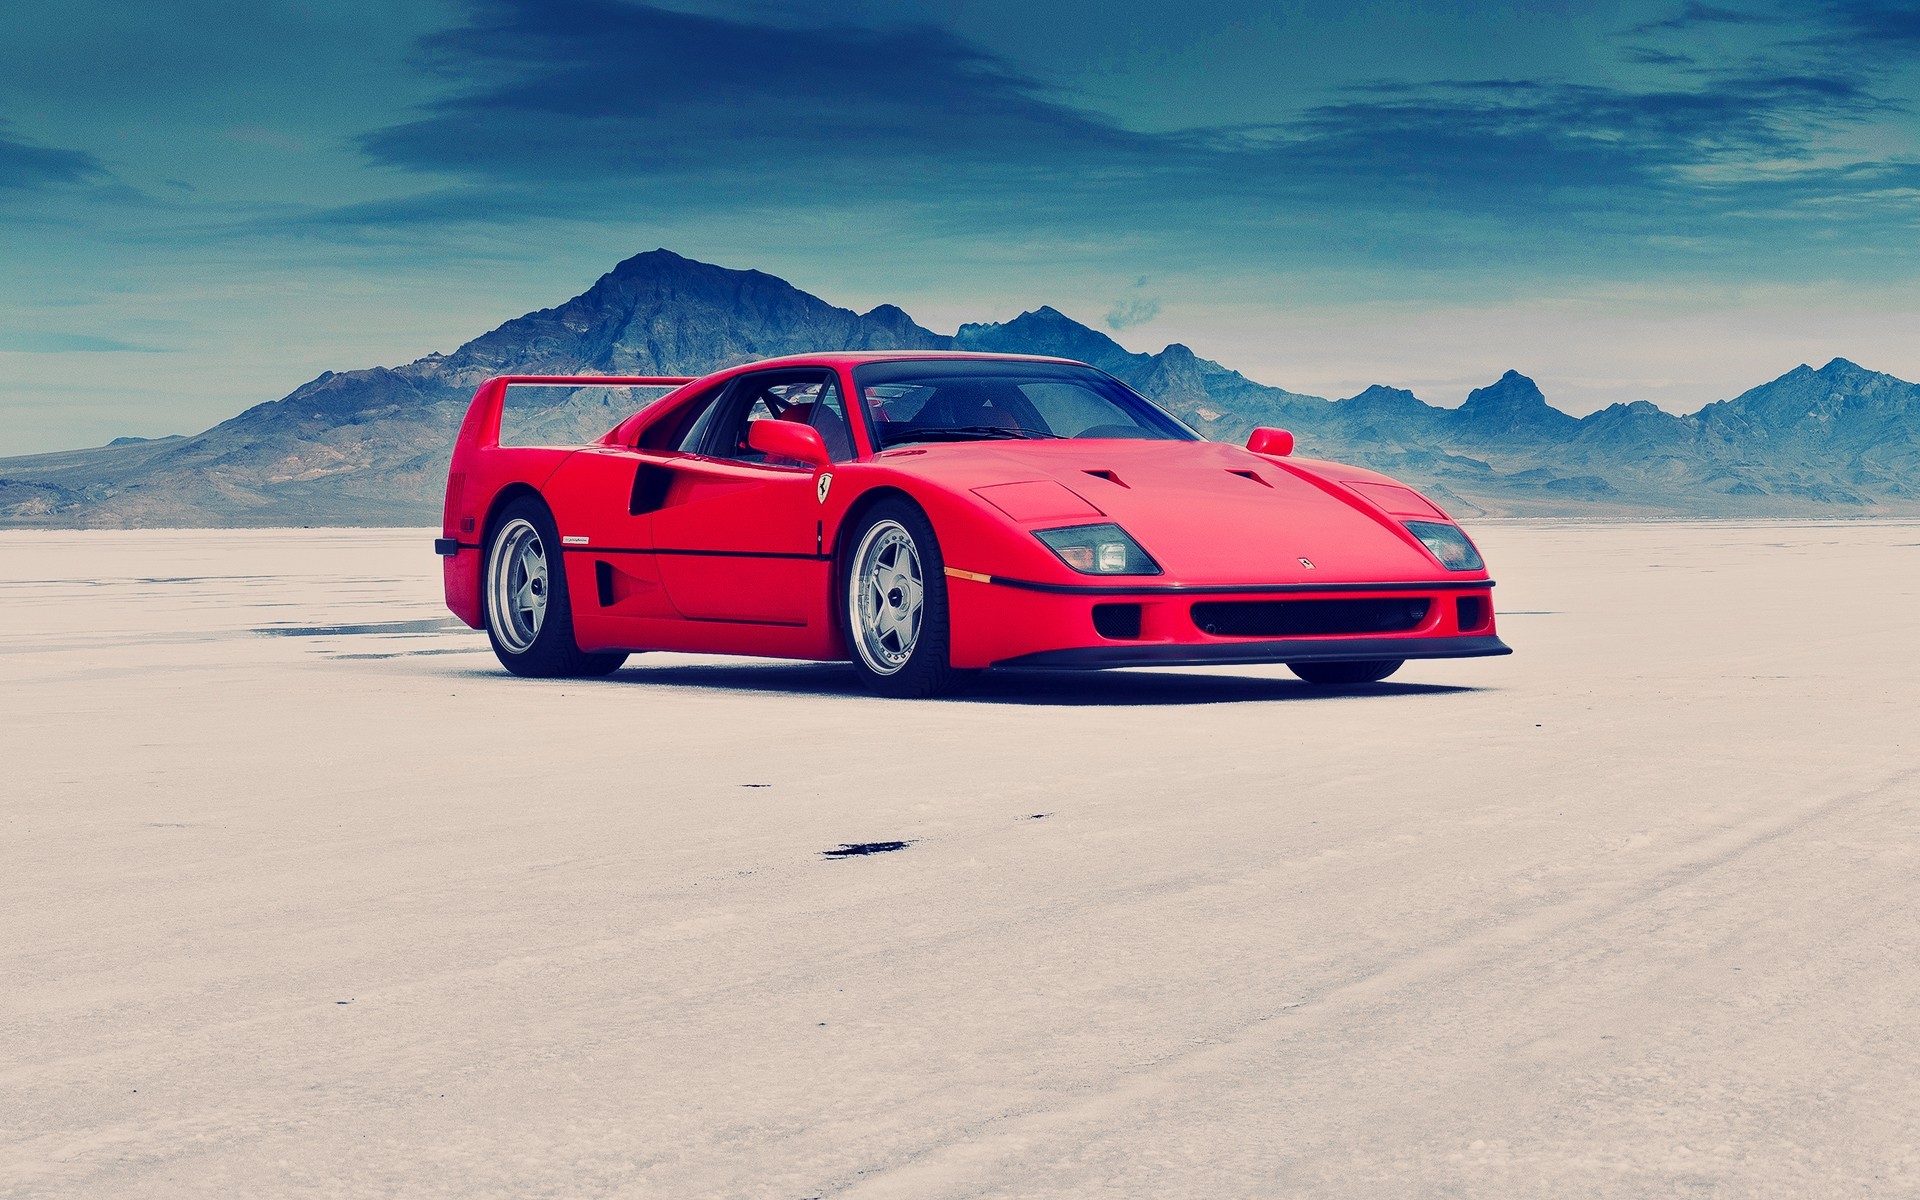 Ferrari F40 Hd Wallpapers Desktop Wallpapers | Images and Photos finder